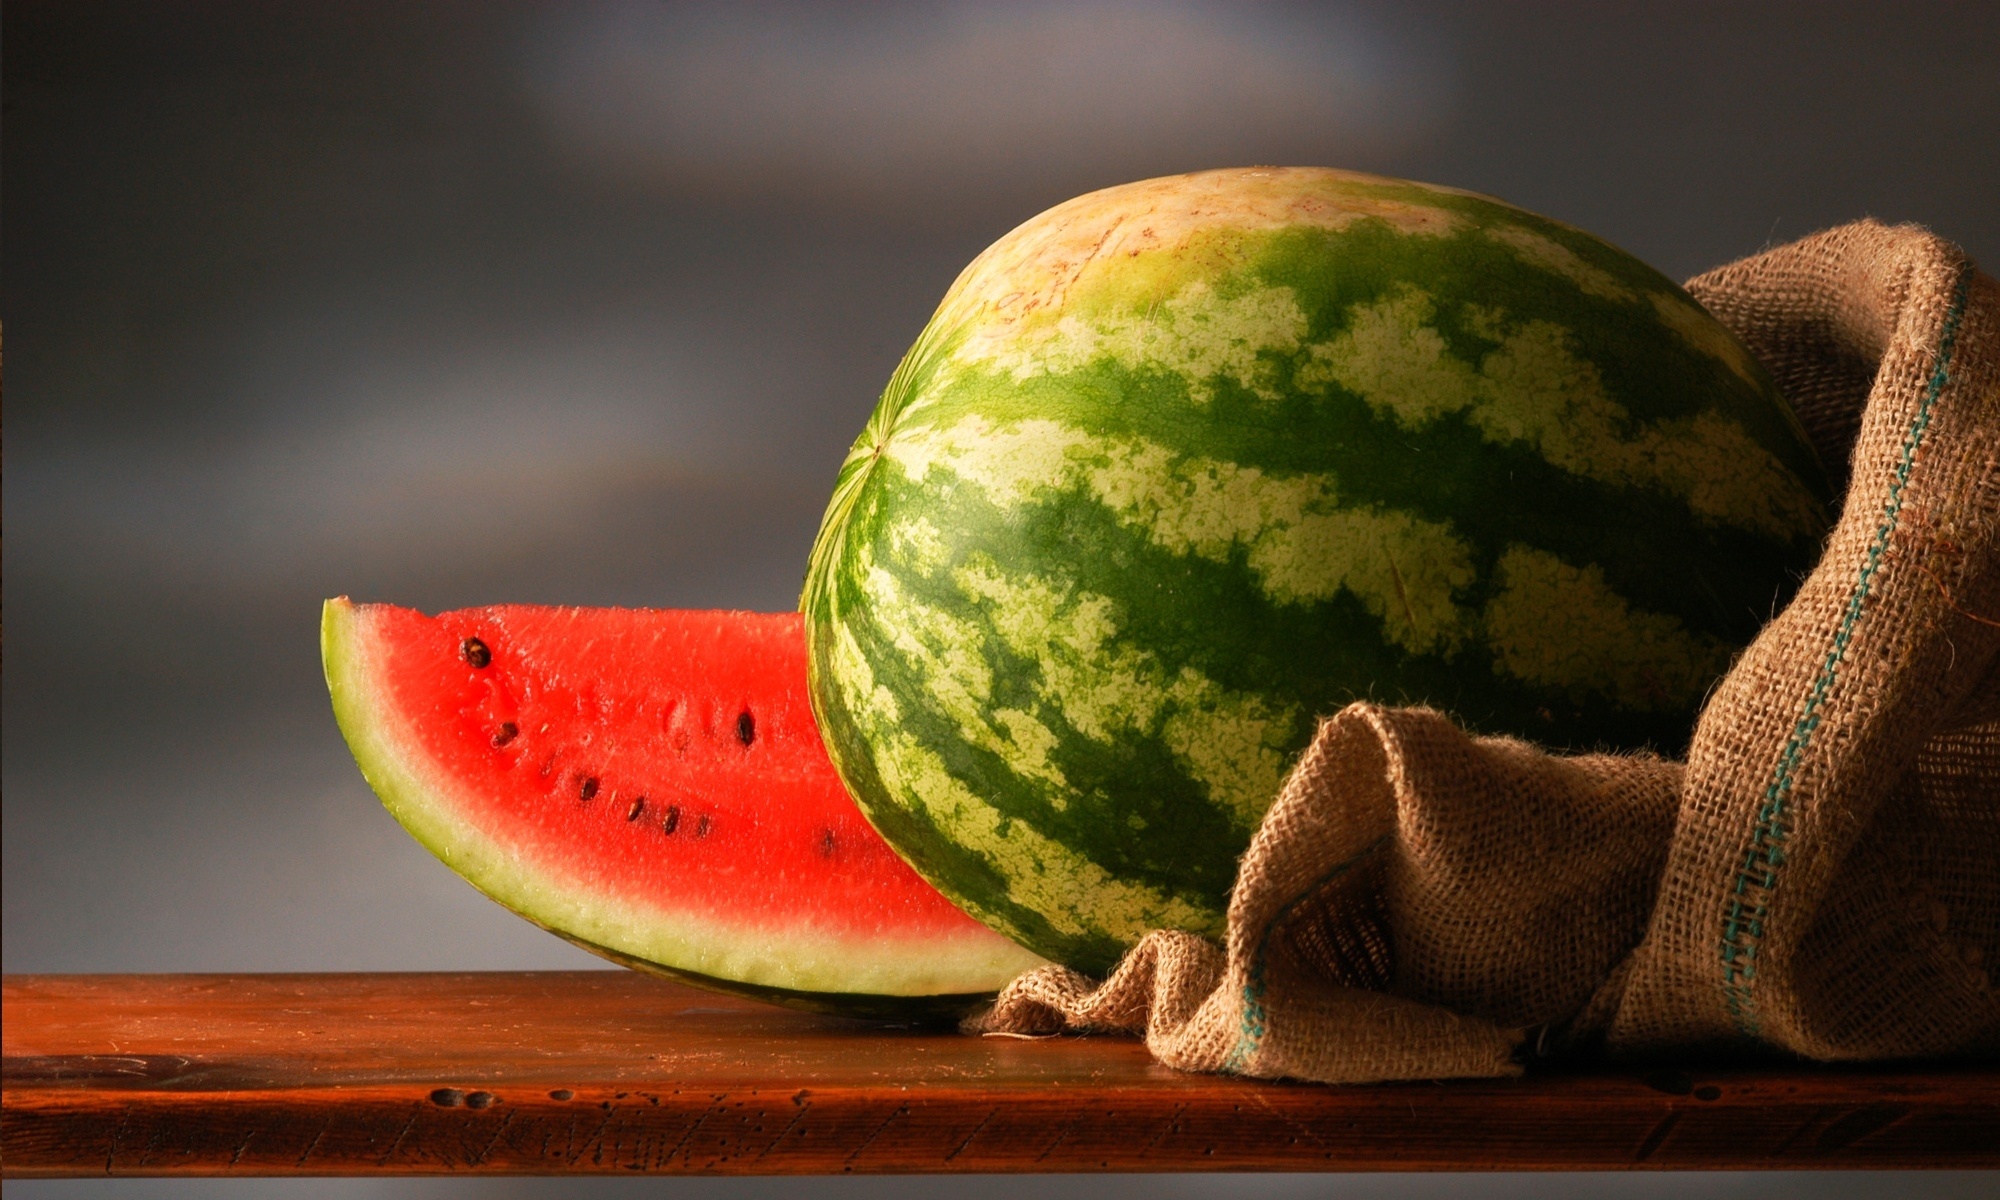 Watermelon: A popular fruit endowed with important nutritional and bioactive compounds. 2000x1200 HD Wallpaper.